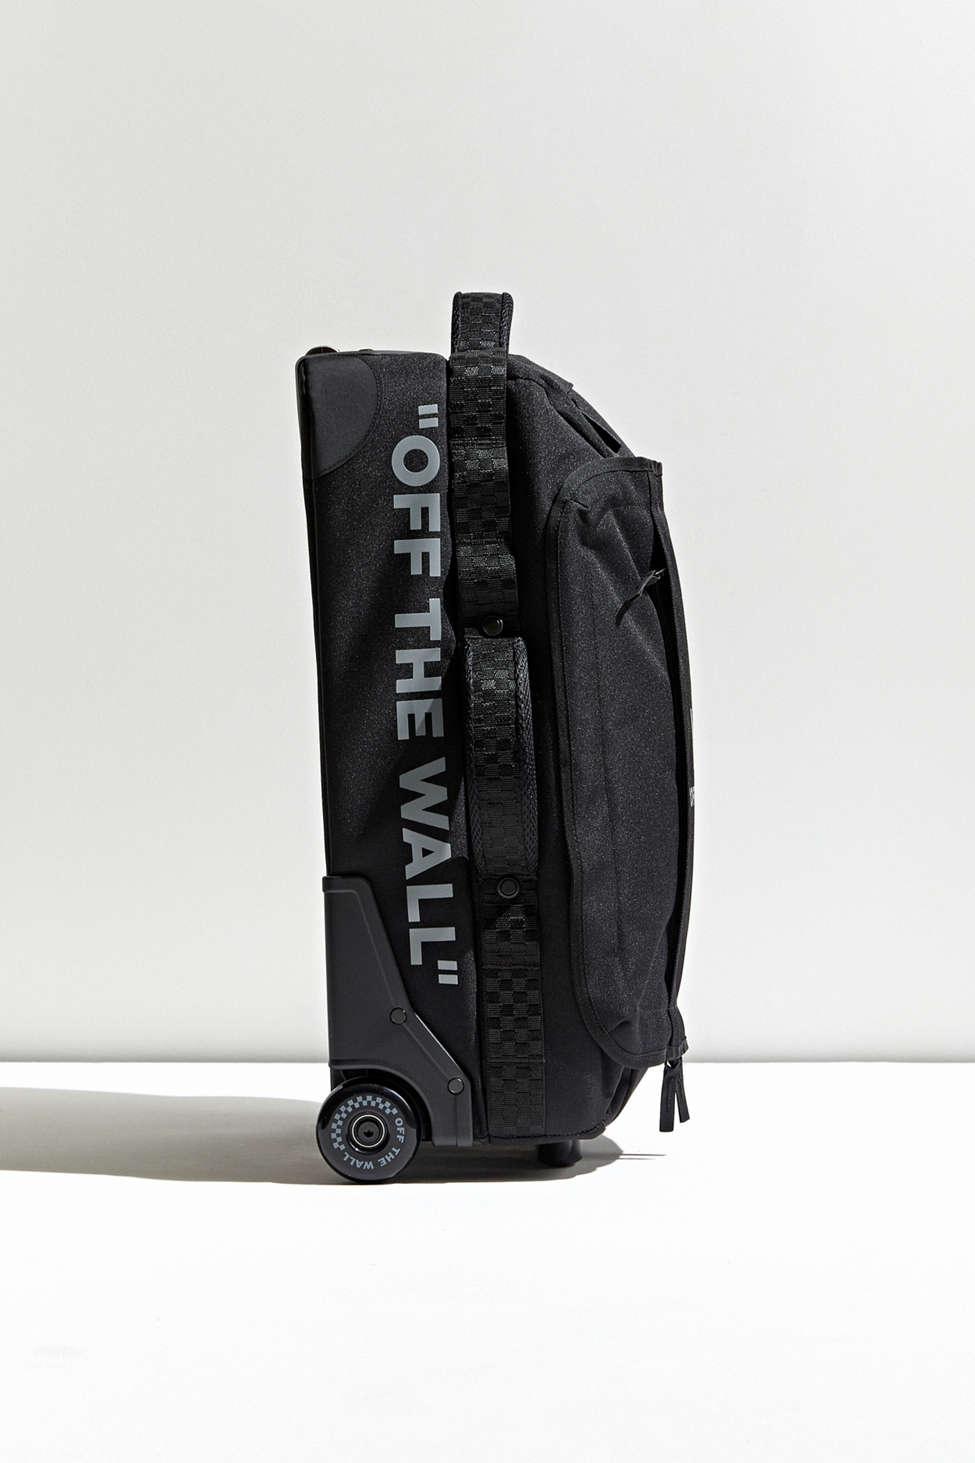 Vans Carry-on Rolling Luggage in Black for Men | Lyst